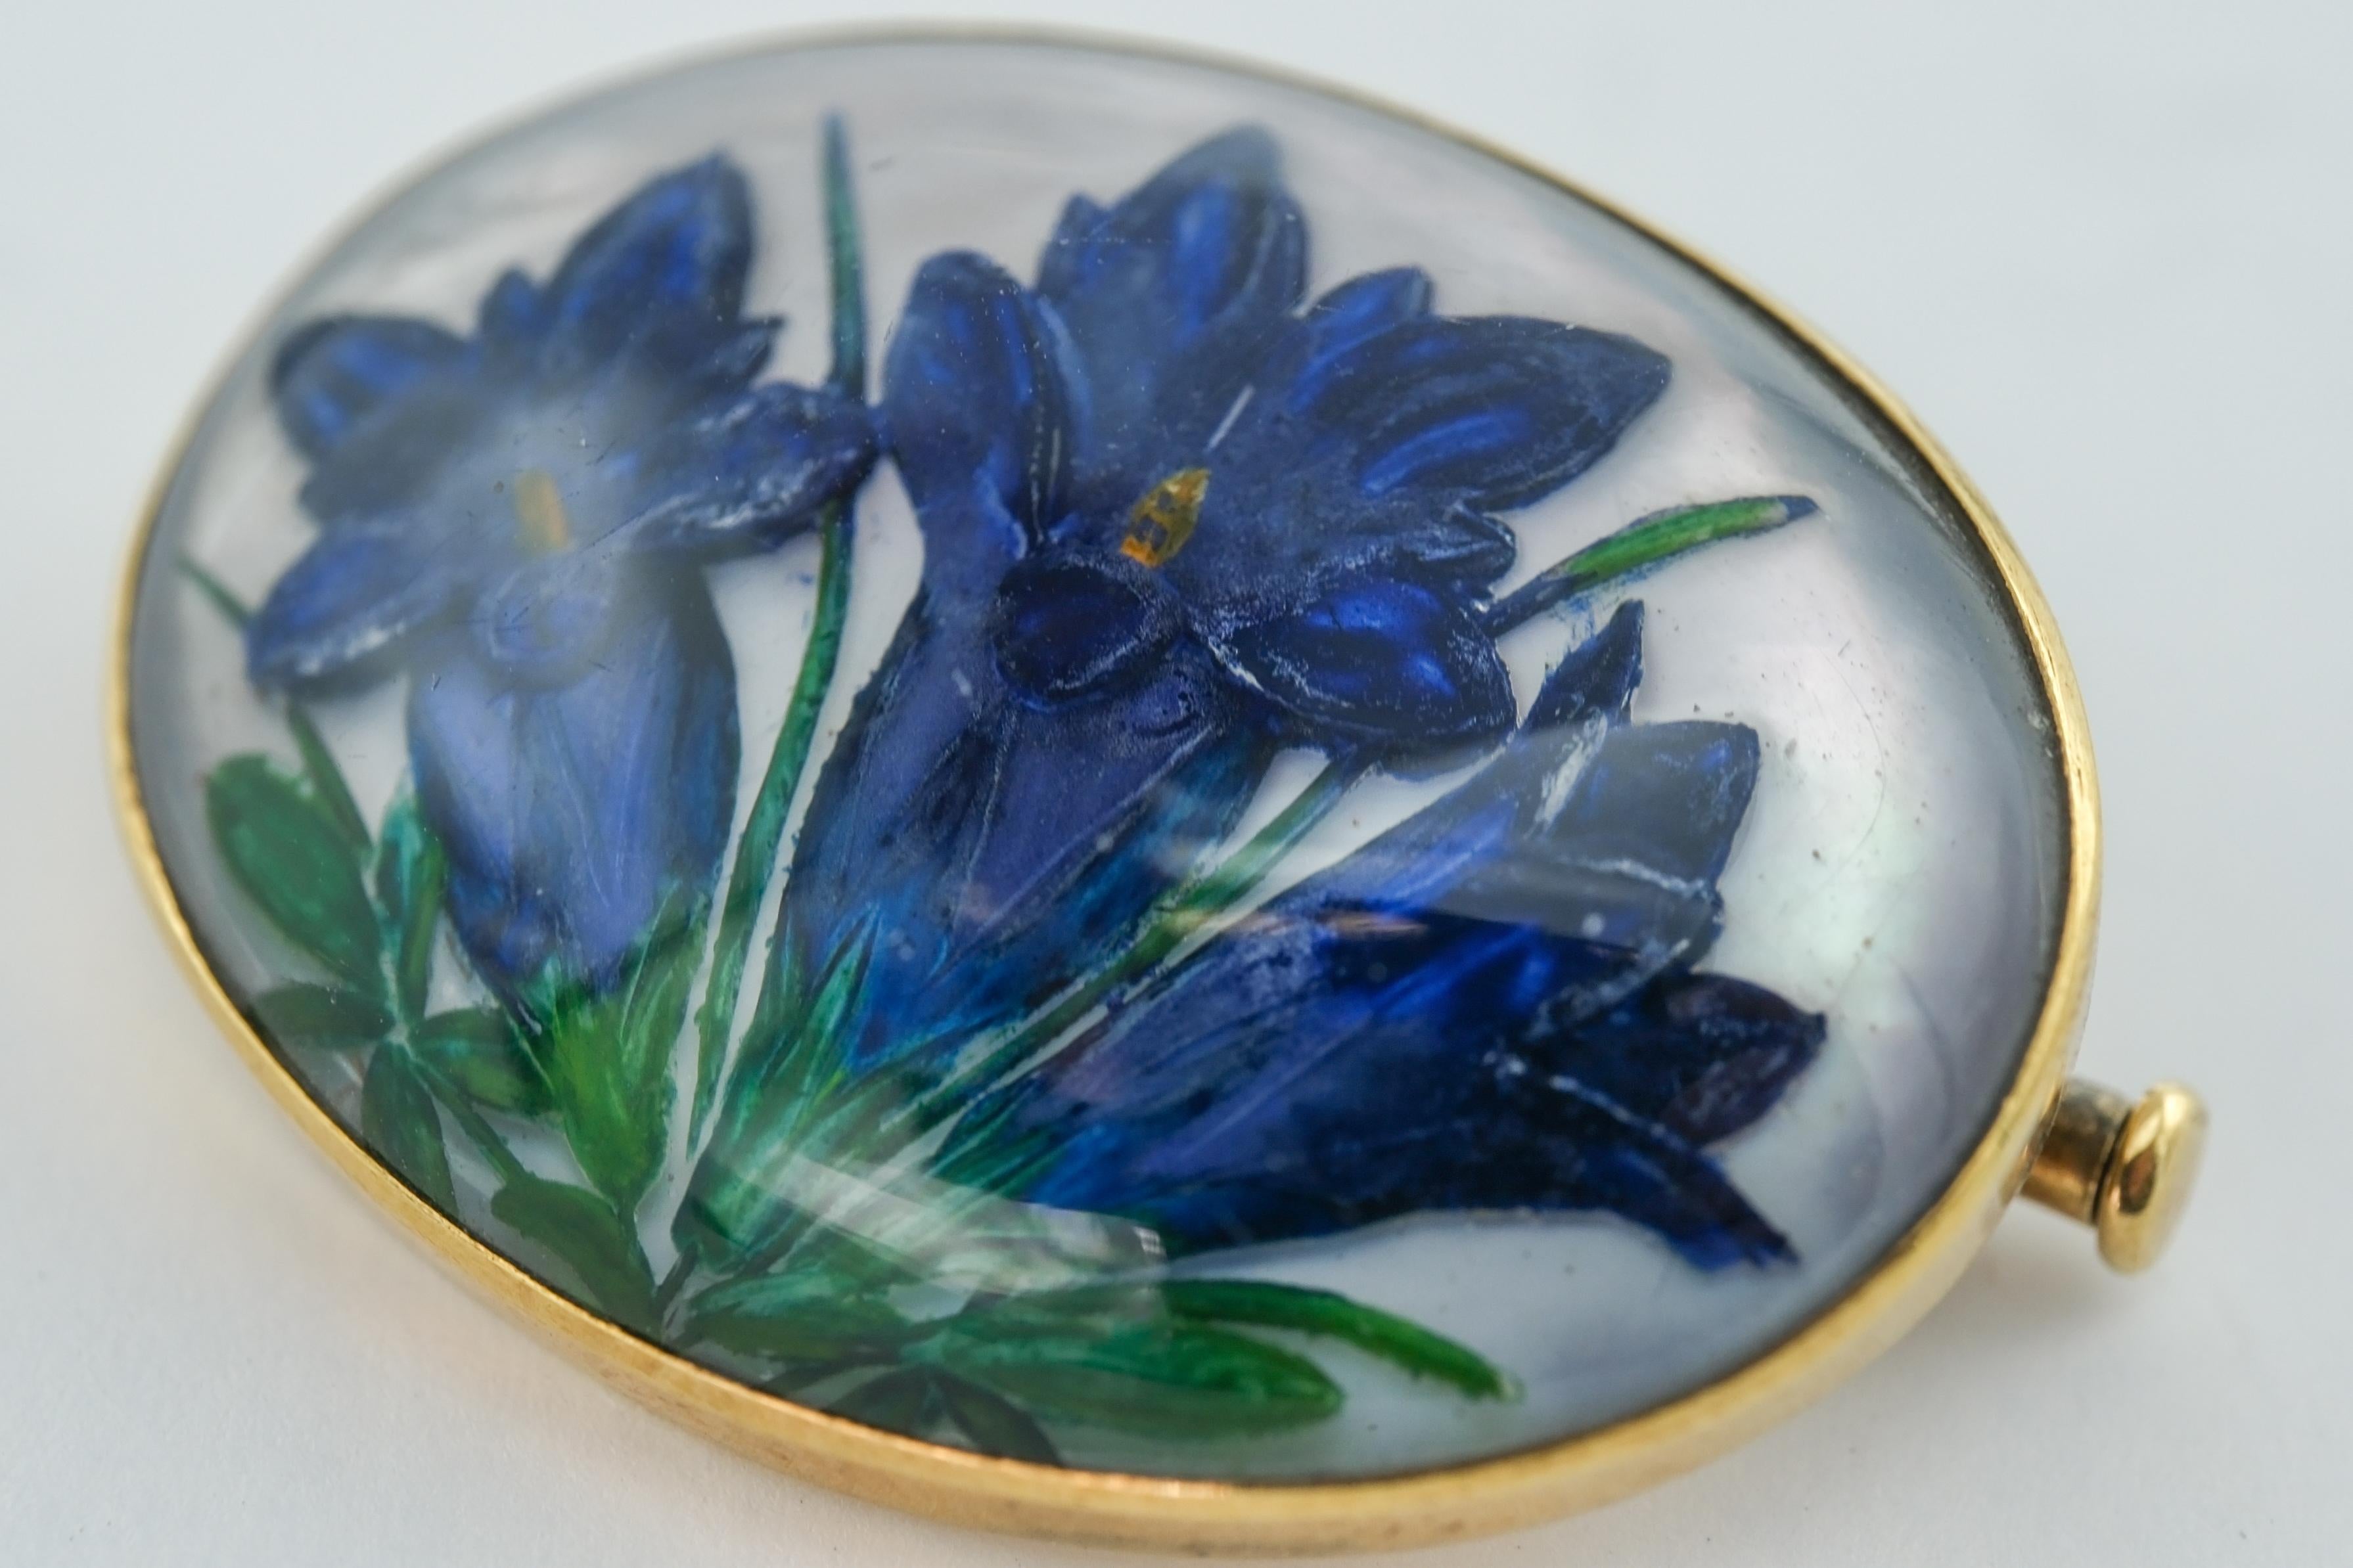 This 14 karat yellow gold pin showcases a masterfully executed reverse painting intaglio of three blueish-purple flowers. Reverse painting intaglio is a specialized technique wherein a design is painted in reverse on the underside of a transparent